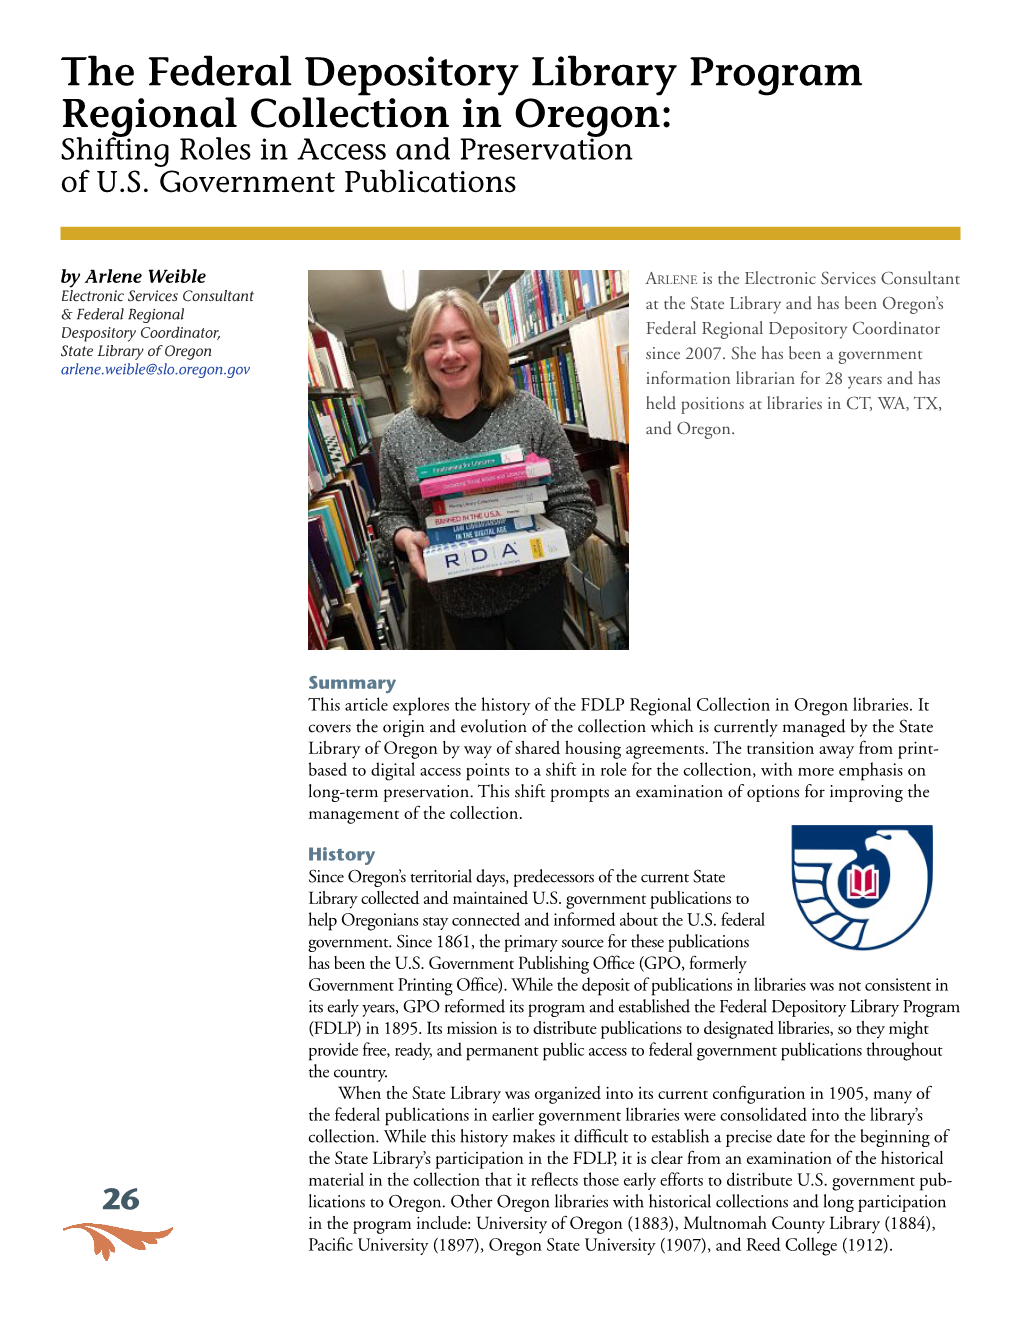 The Federal Depository Library Program Regional Collection in Oregon: Shifting Roles in Access and Preservation of U.S